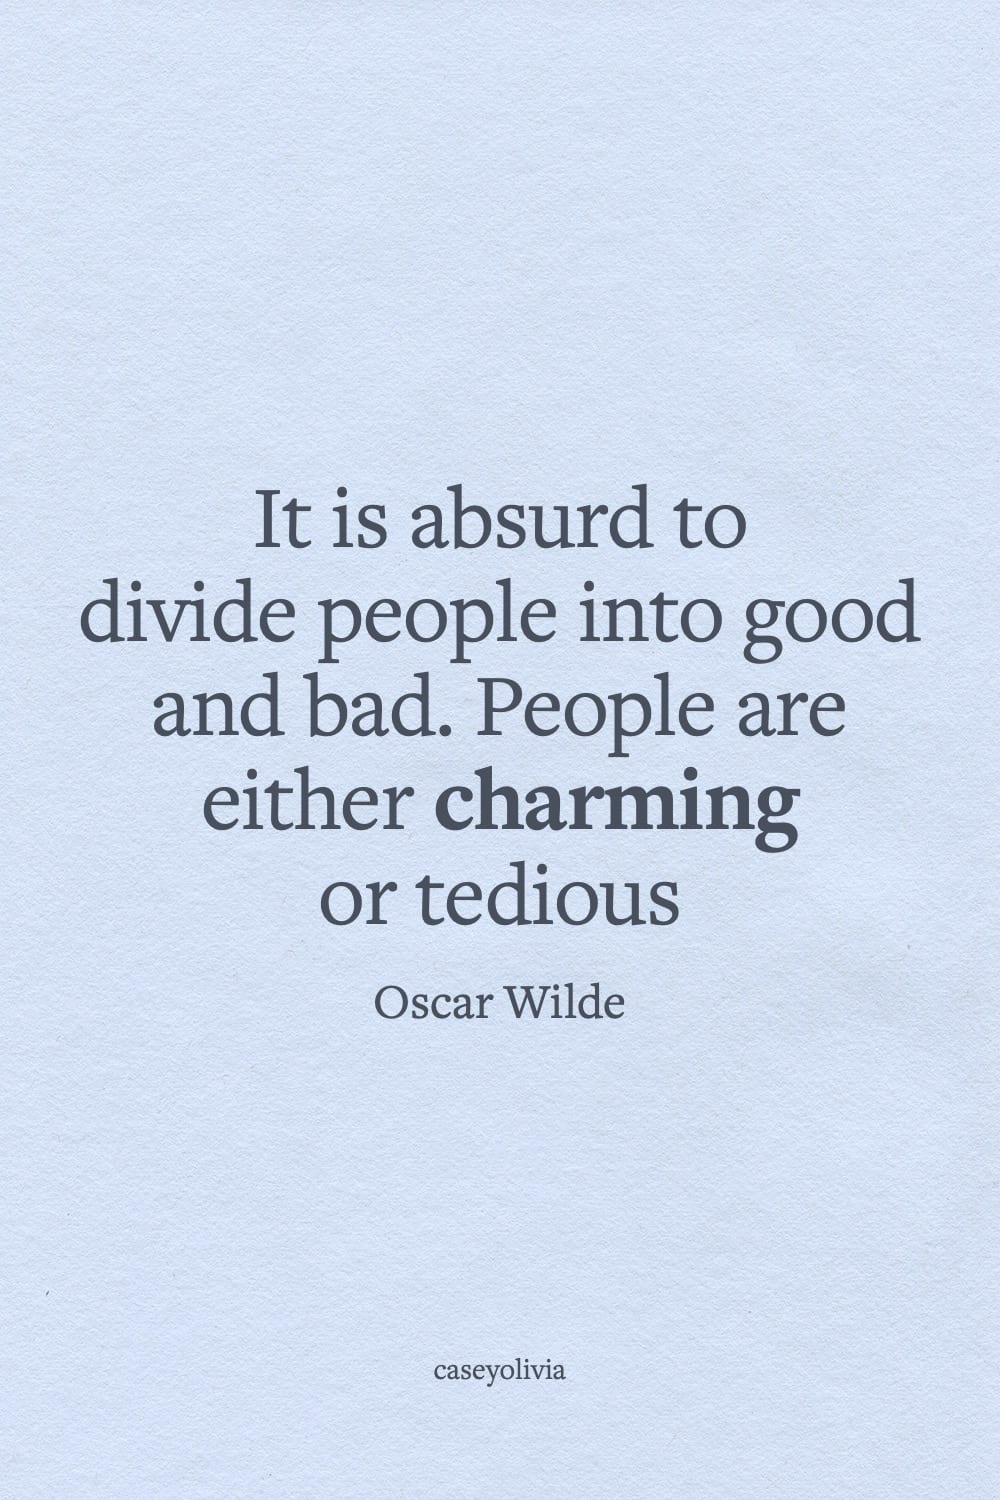 oscar wilde dividing people into good and bad